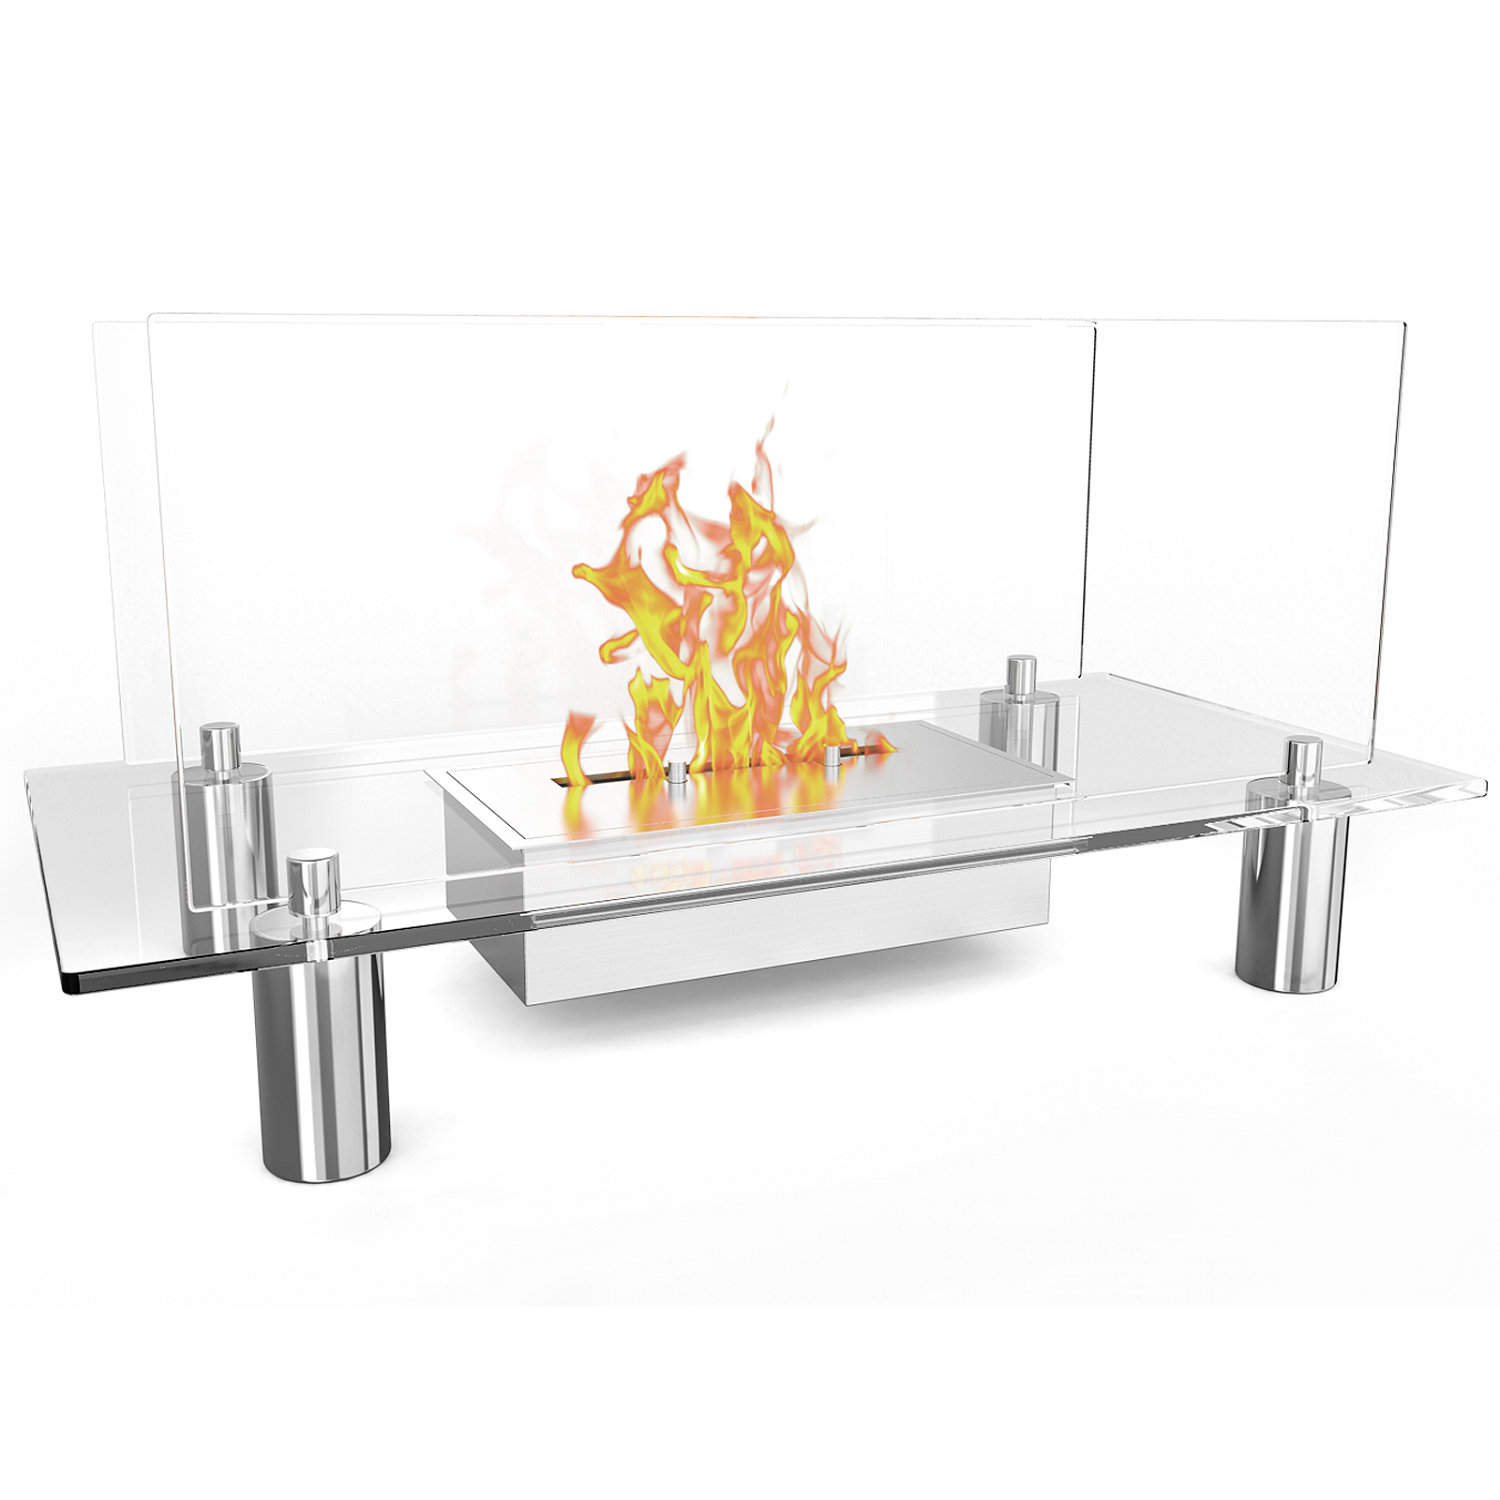 Regal Flame White Bow Ventless Free Standing Bio Ethanol Fireplace Can Be Used as a Indoor, Outdoor, Gas Log Inserts, Vent Free